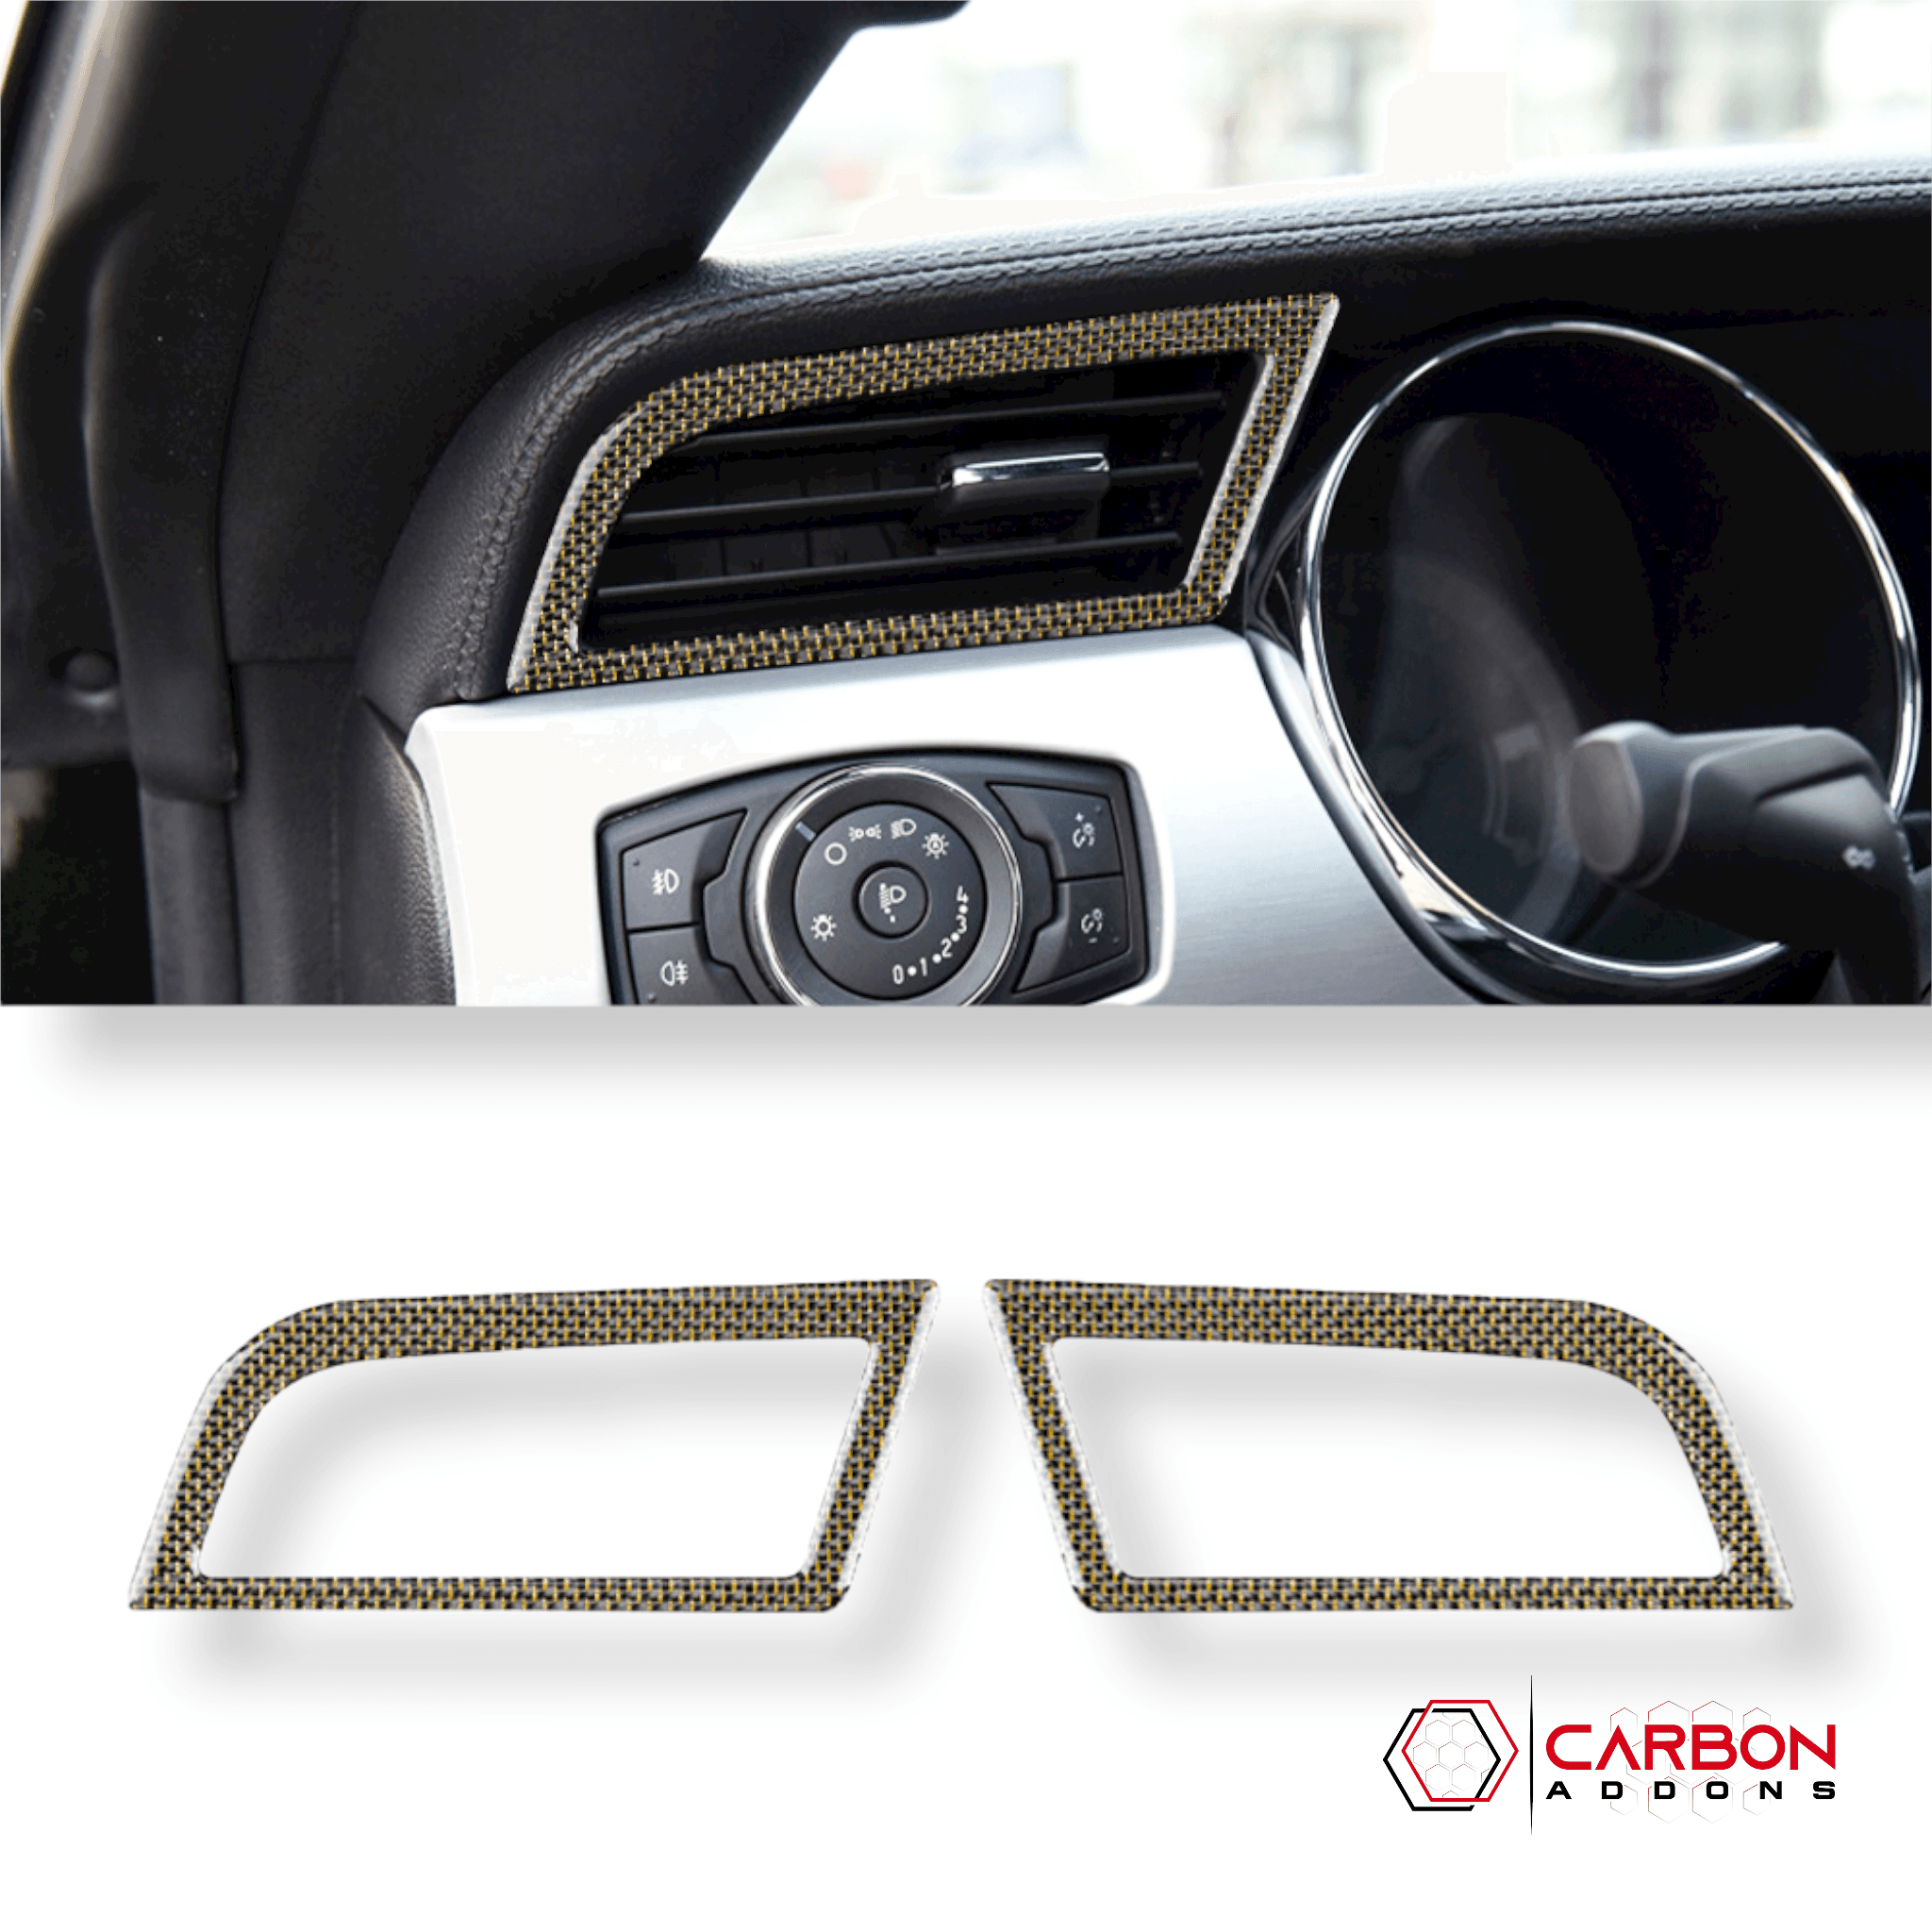 Reflective Carbon Fiber Dashboard AC Vent Trim Overlay for Ford Mustang 2015-2023 -2pcs - carbonaddons Carbon Fiber Parts, Accessories, Upgrades, Mods